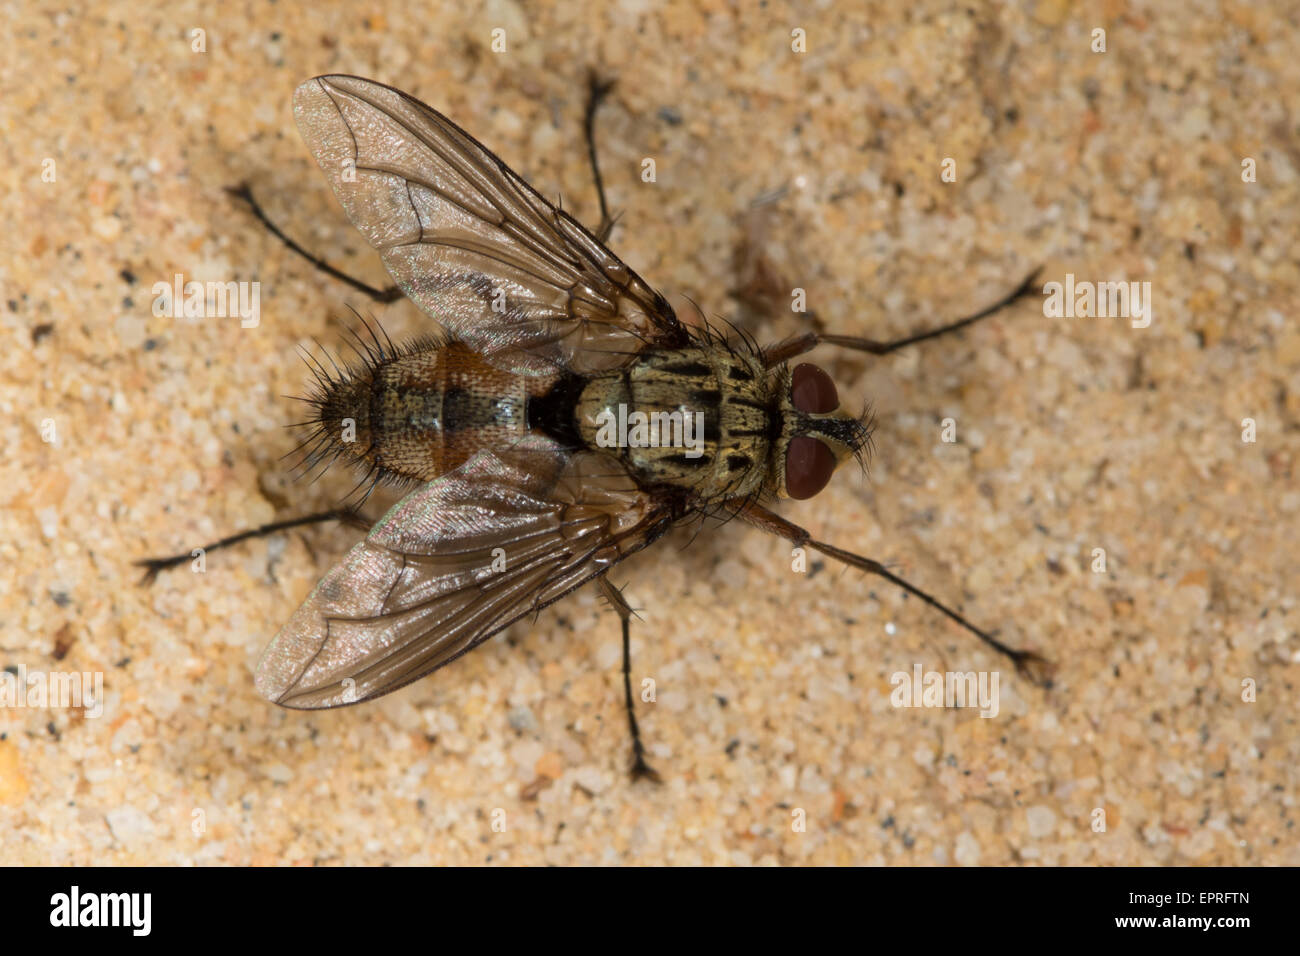 Dexia rustica (Tachinidae) fly resting on sand Stock Photo